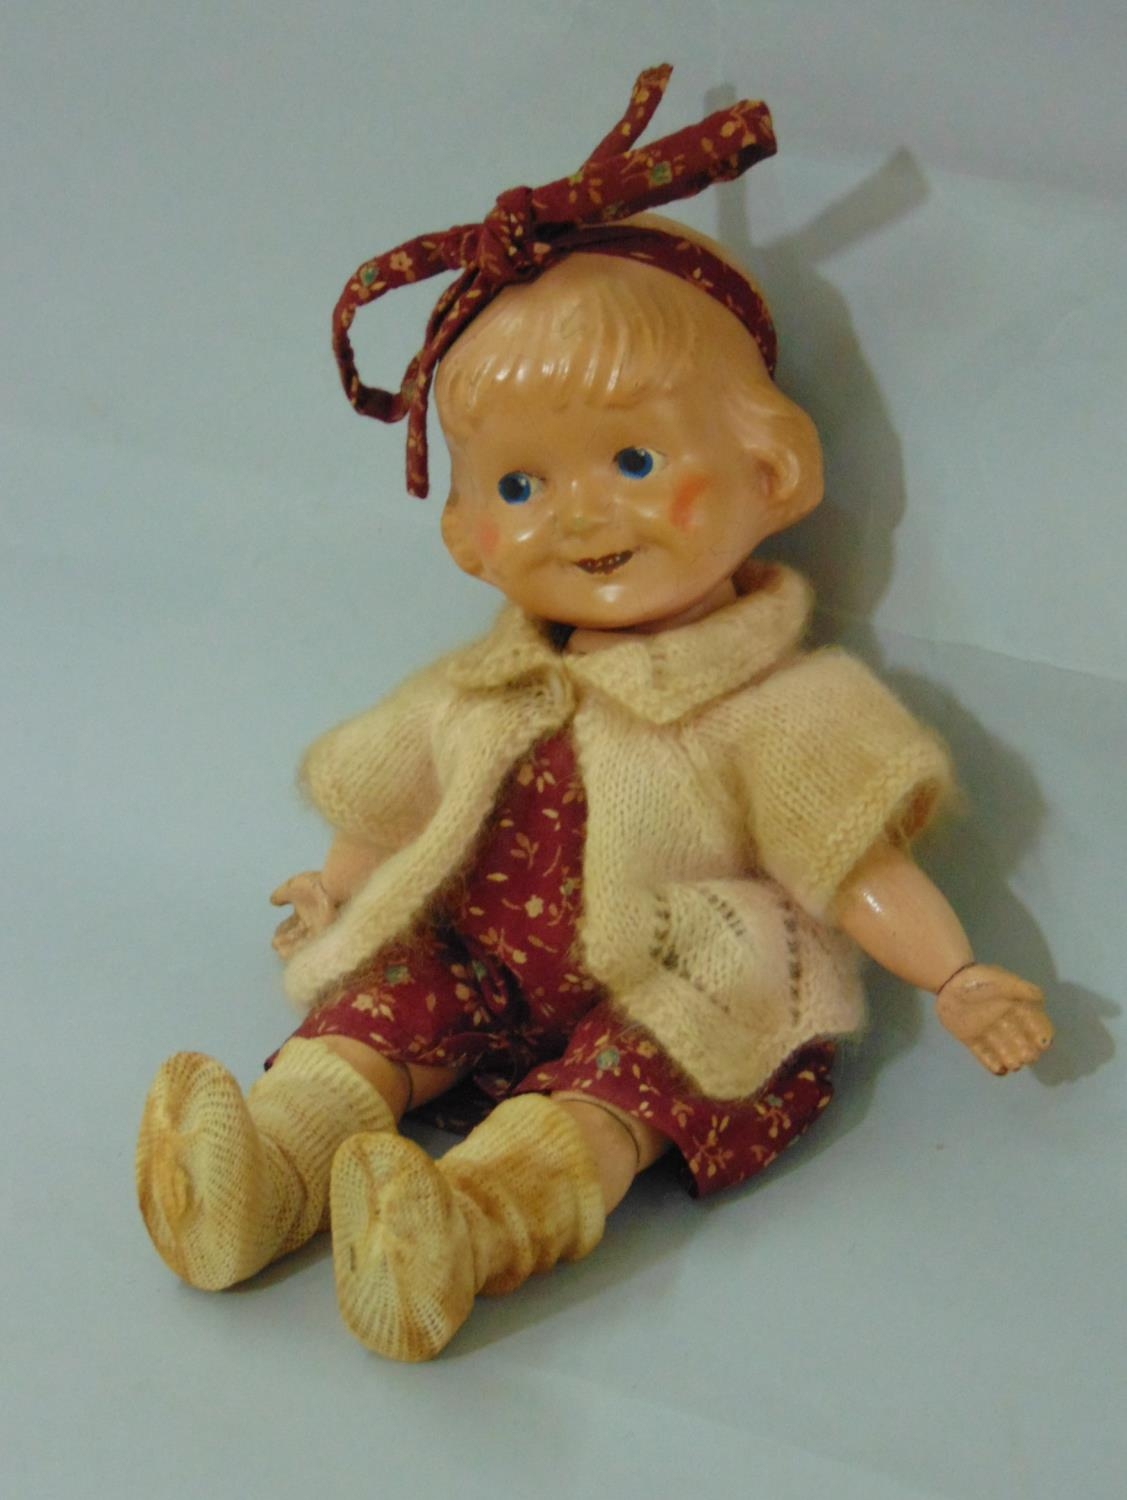 1920s 'Margie' doll by Joseph Kallus - auctions & price archive